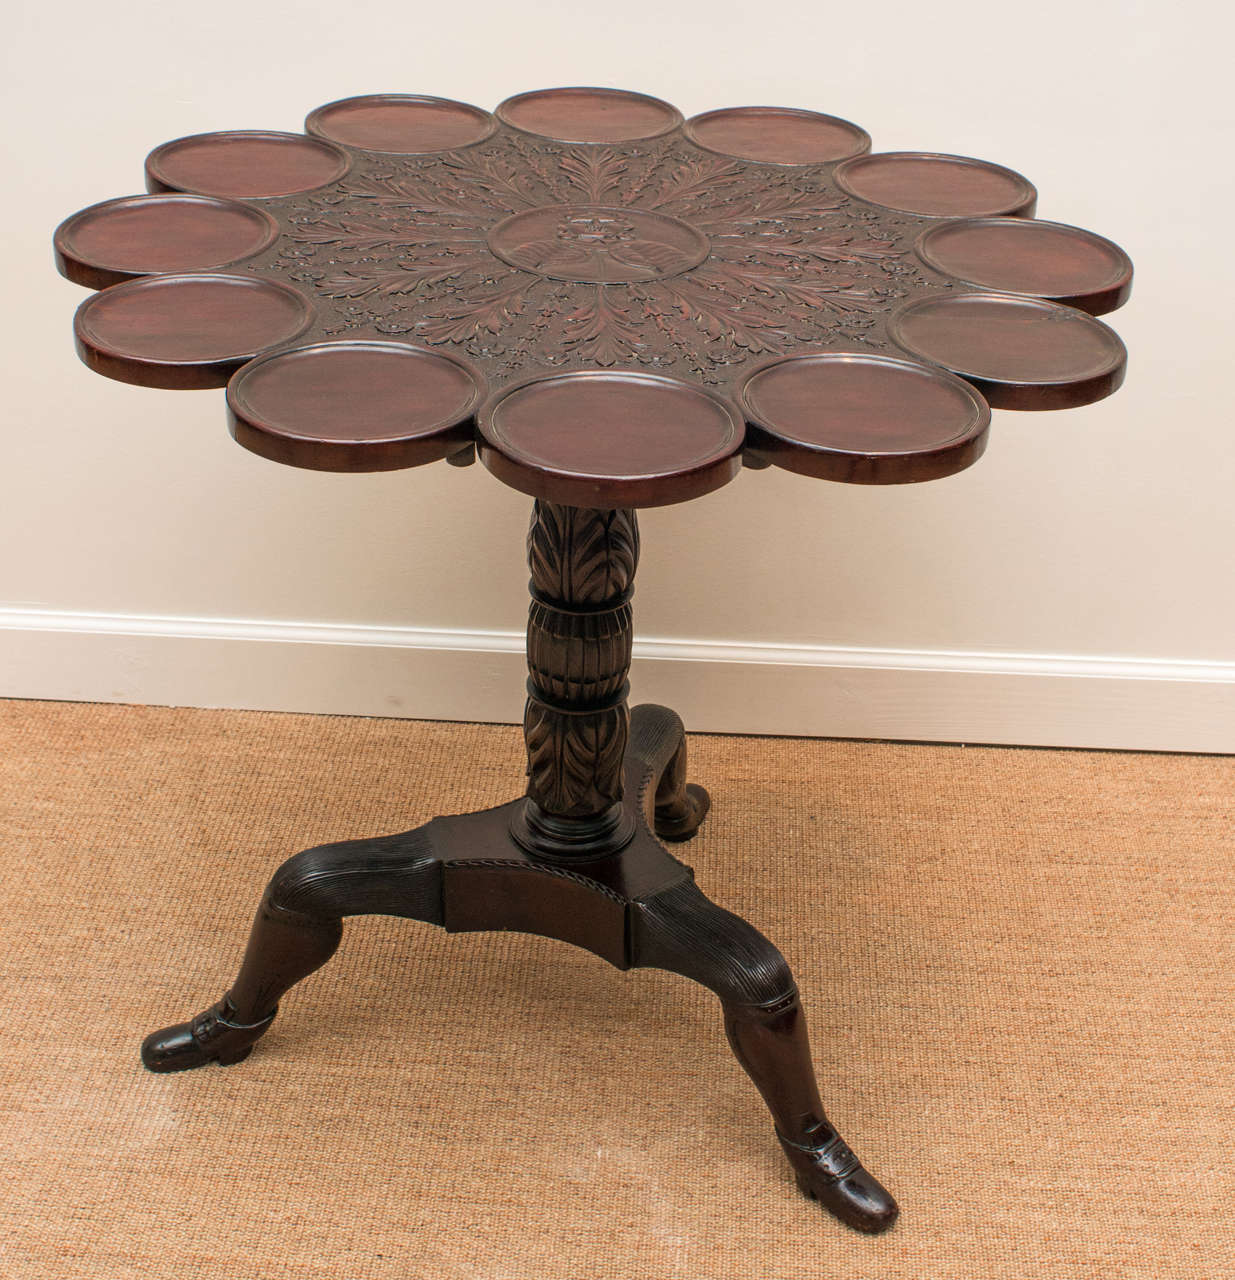 Mahogany tripod tilt-top supper table, heavily carved top standing on the well know Isle of Man feet<br />
<br />
